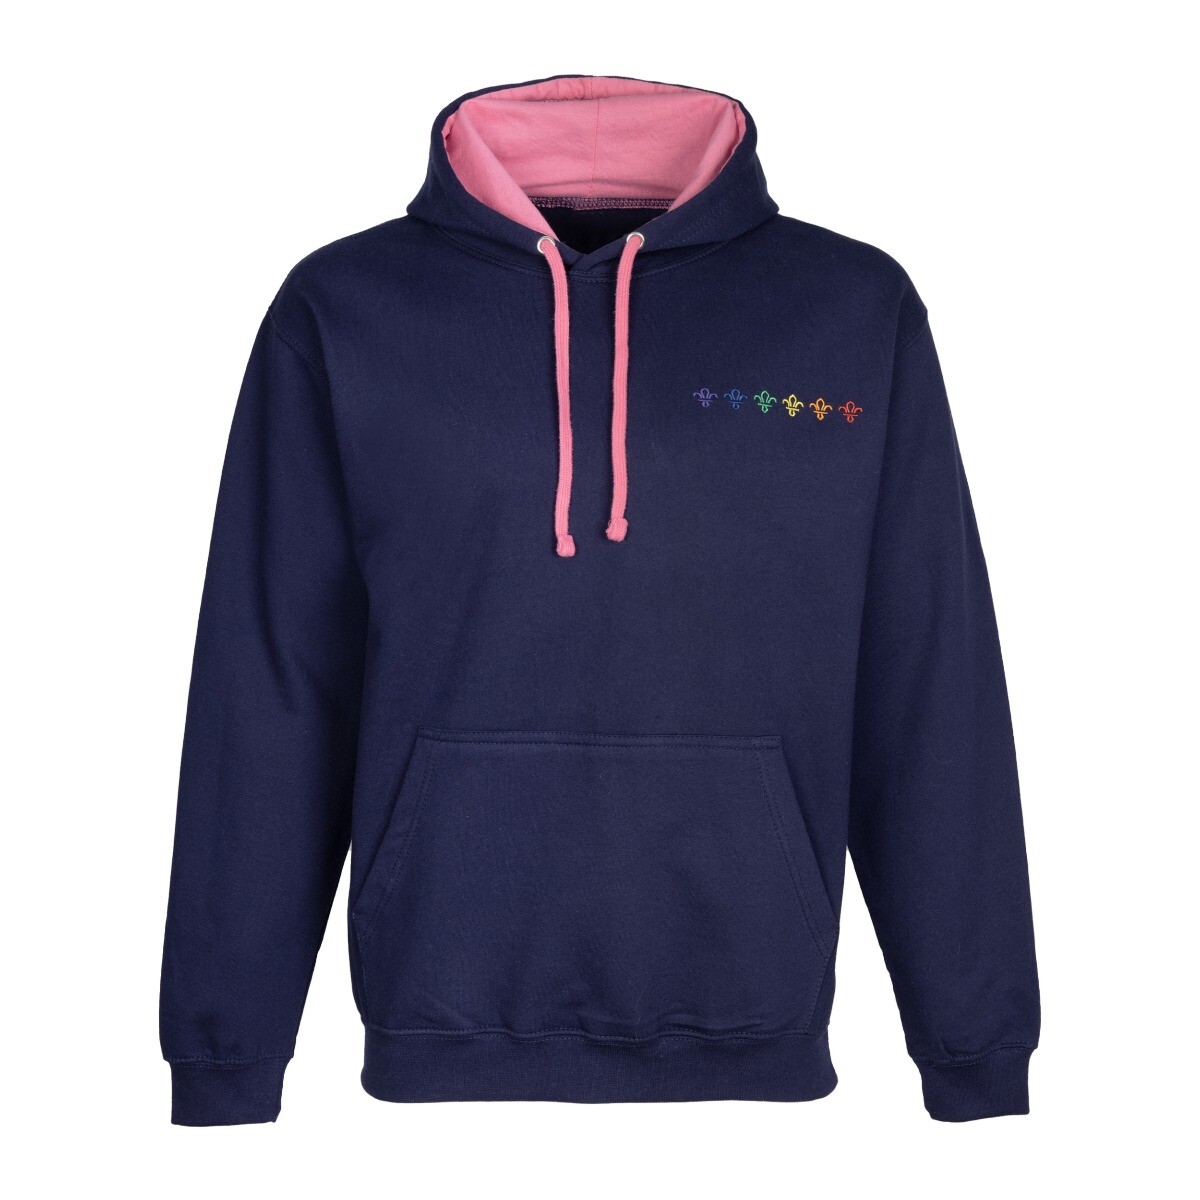 Scouts Pride Brights Hoodie Scouts Sections